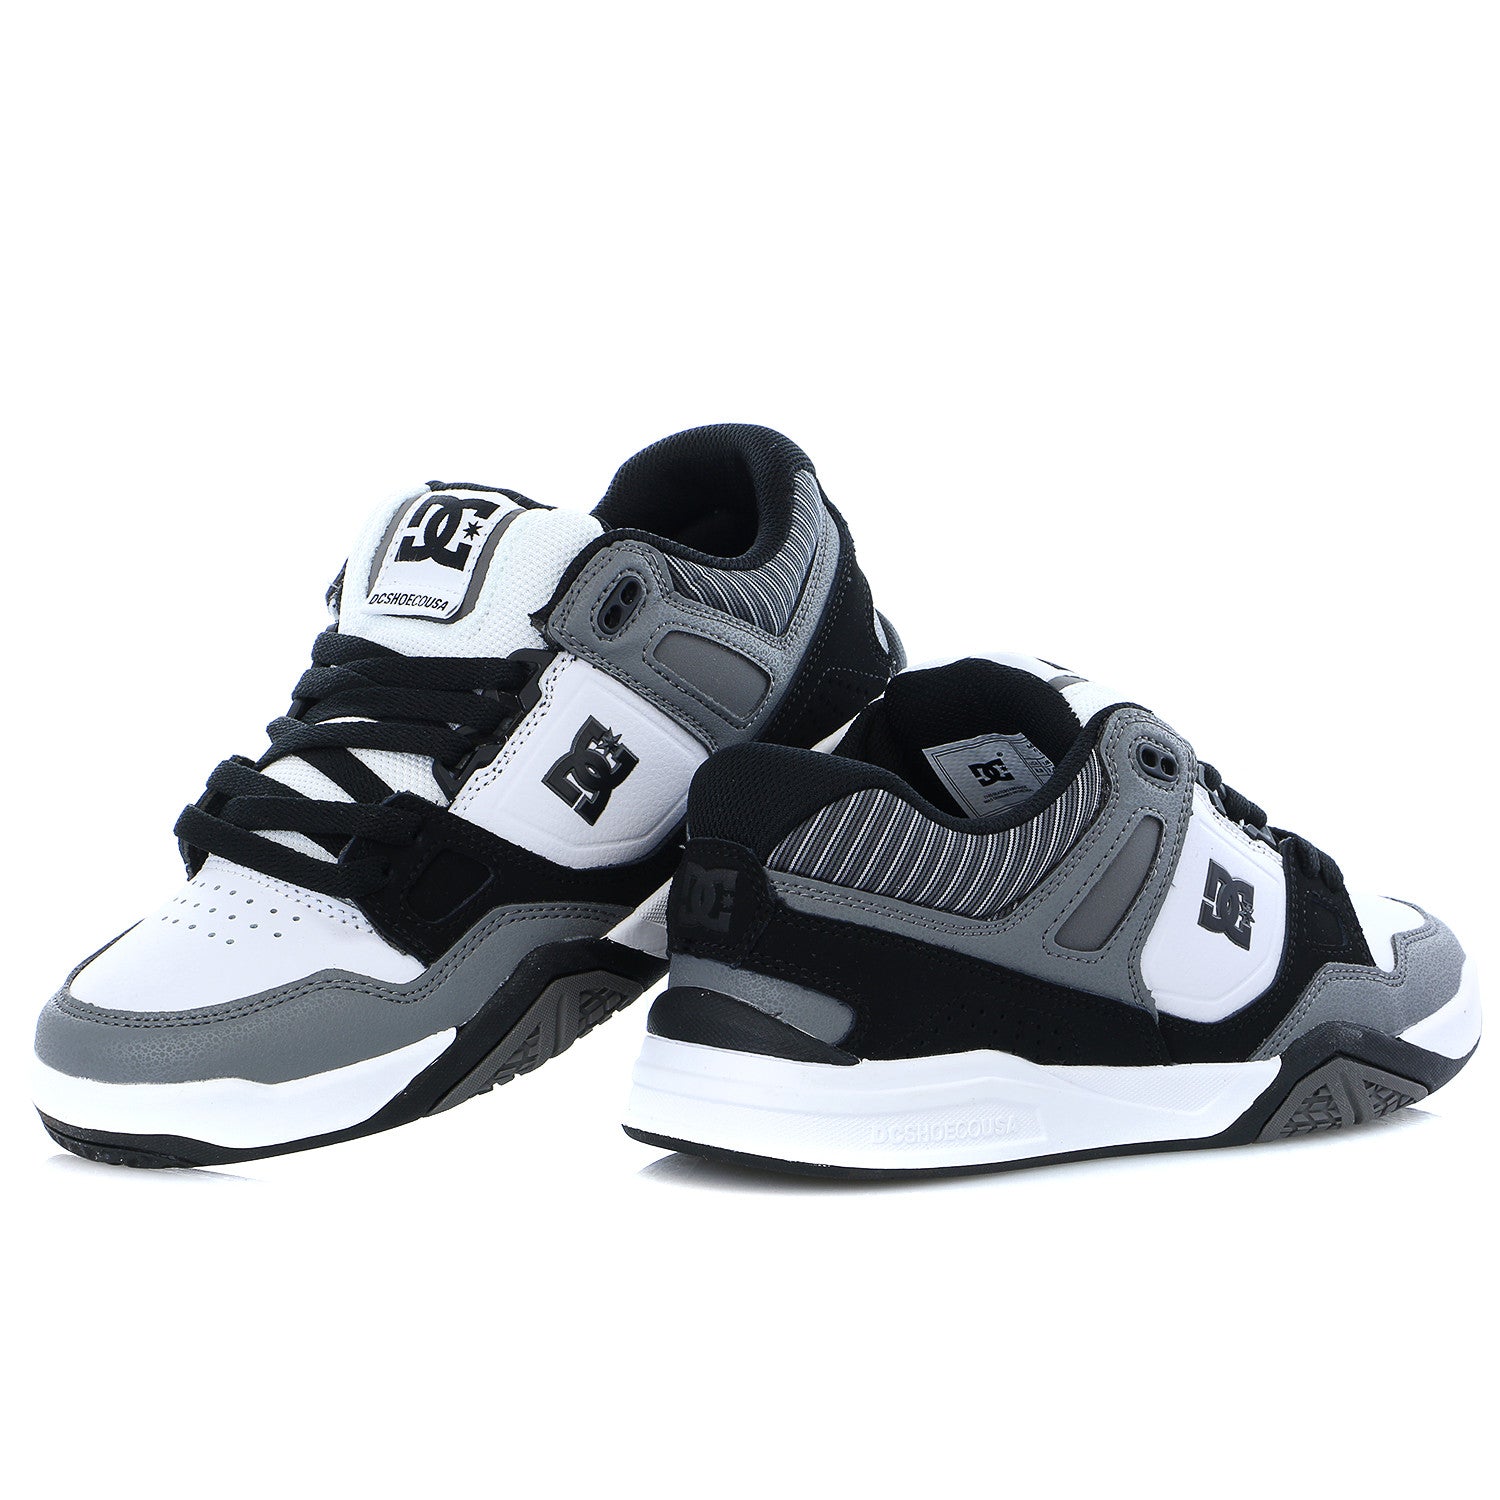 dc stag skate shoes